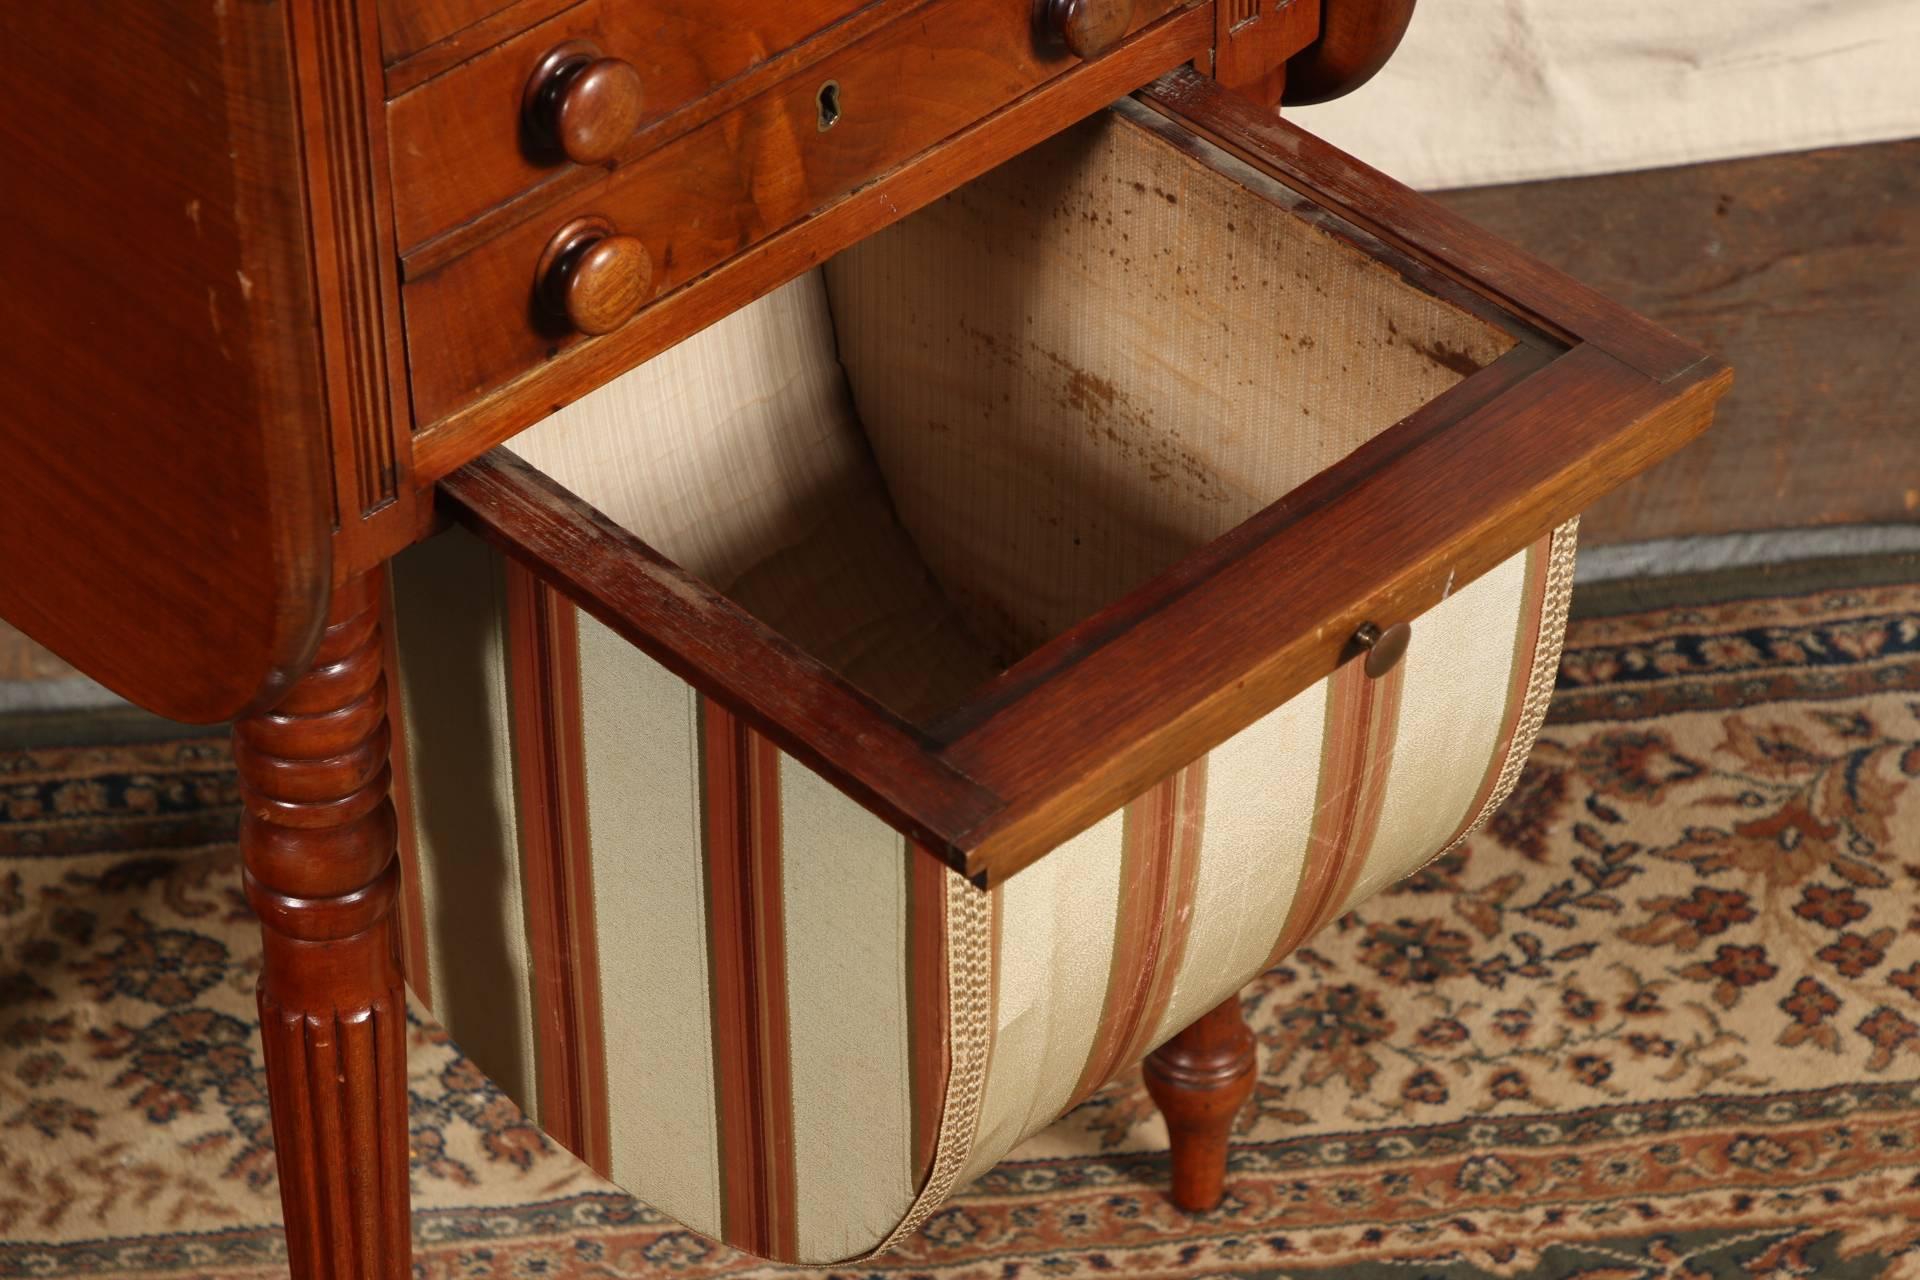 Mahogany with drop leaf sides, the cabinet with reeded supports over turned and reeded cylindrical legs with peg feet. Three drawers with turned pulls and brass keyholes over a pull-out lower striped fabric compartment.
Condition: joinery loose